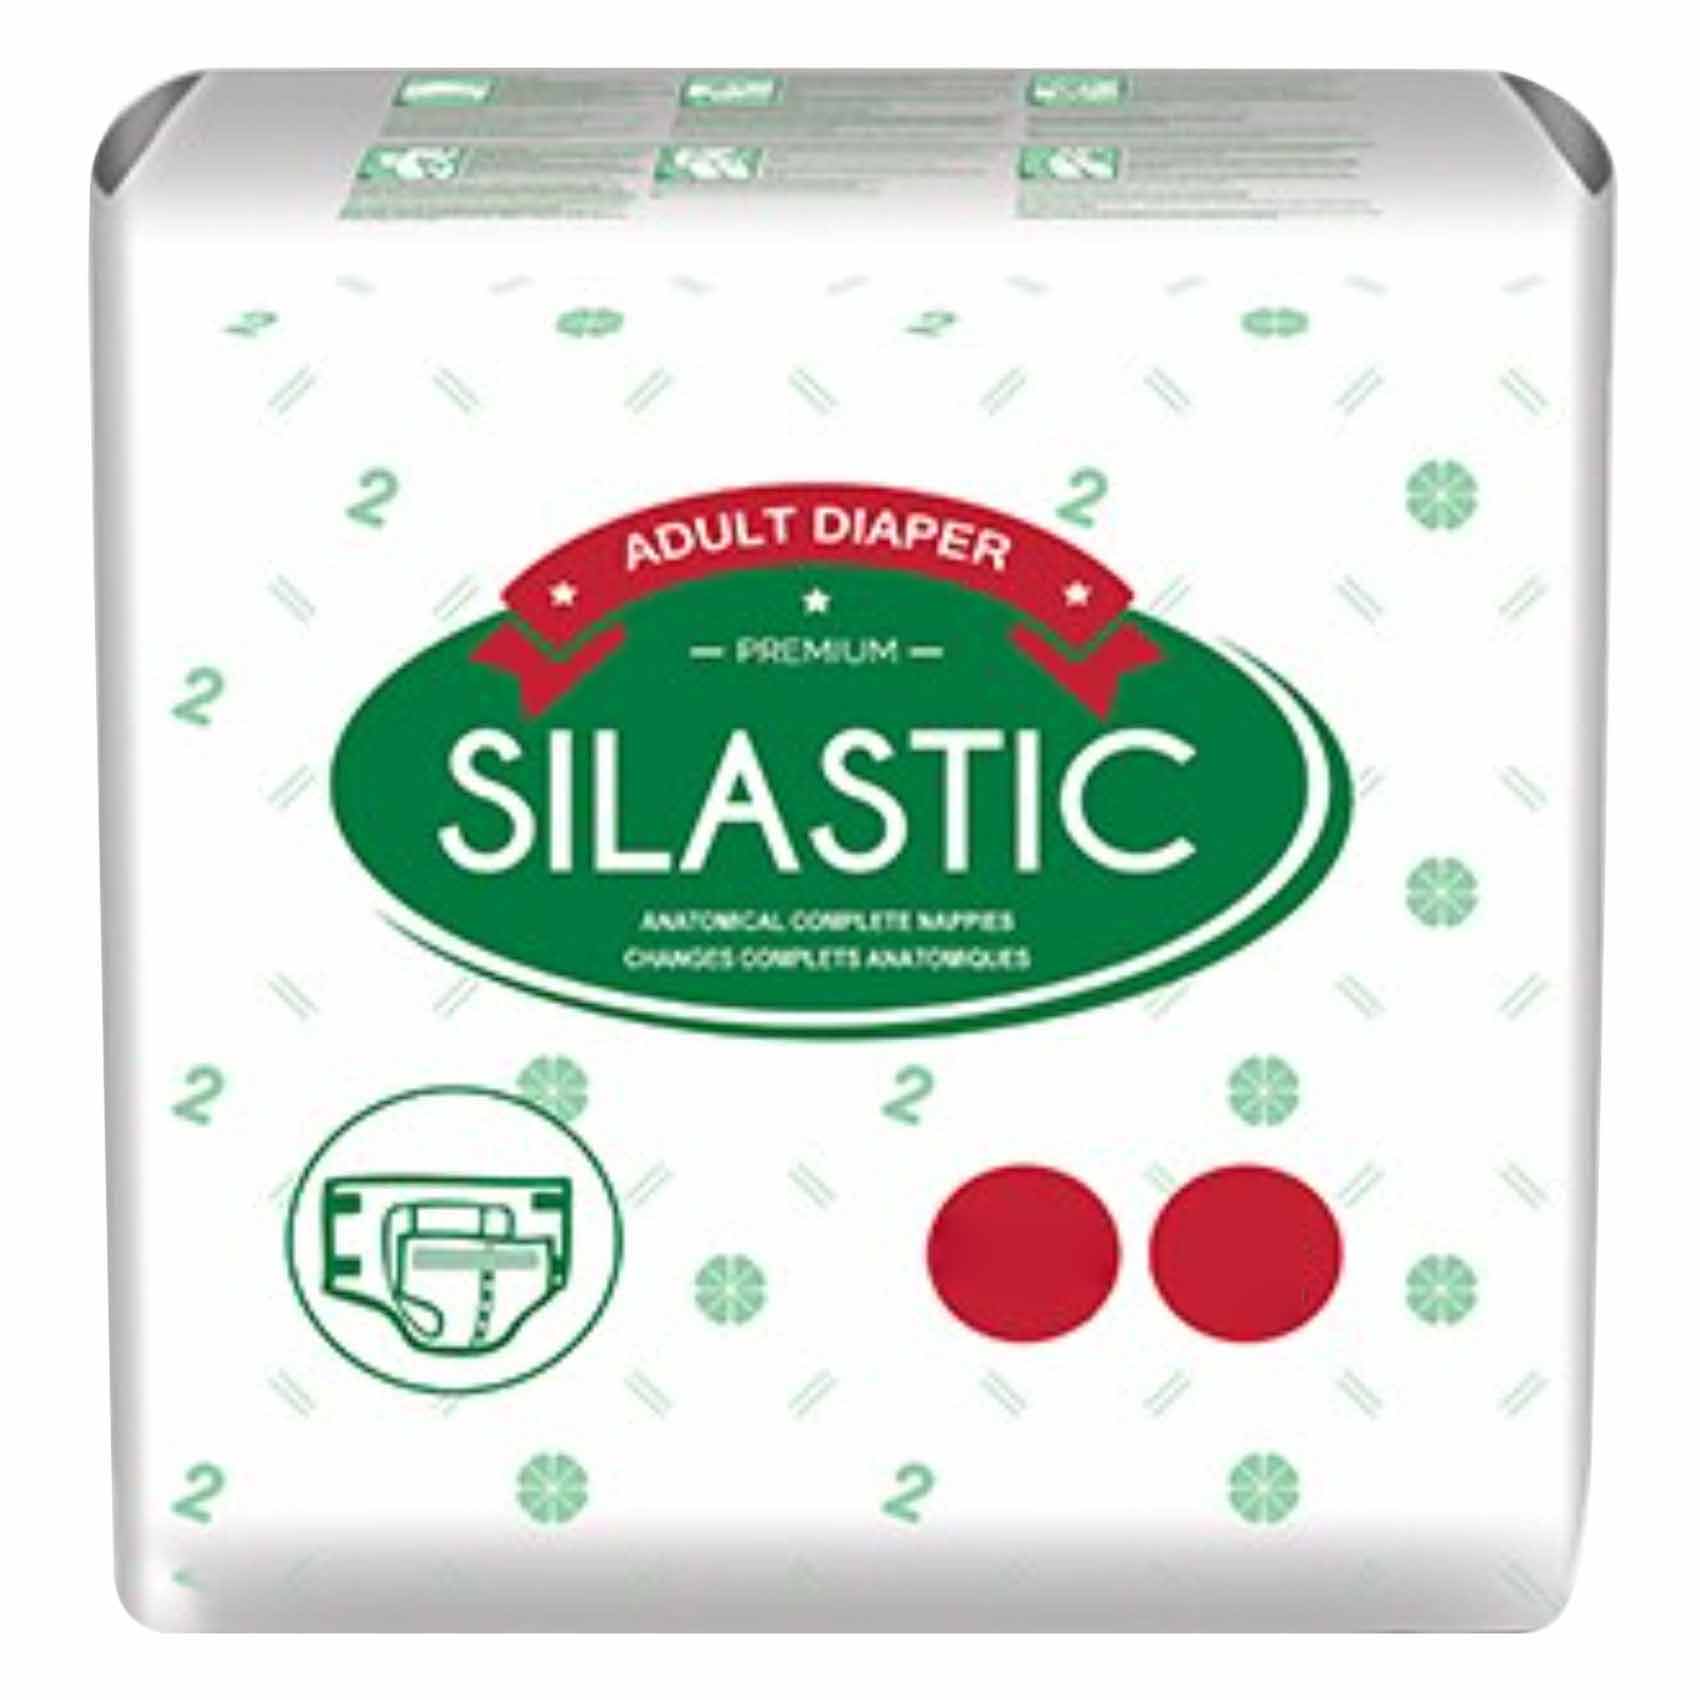 Oui Oui Silastic Adult Diapers N2 15 Inch